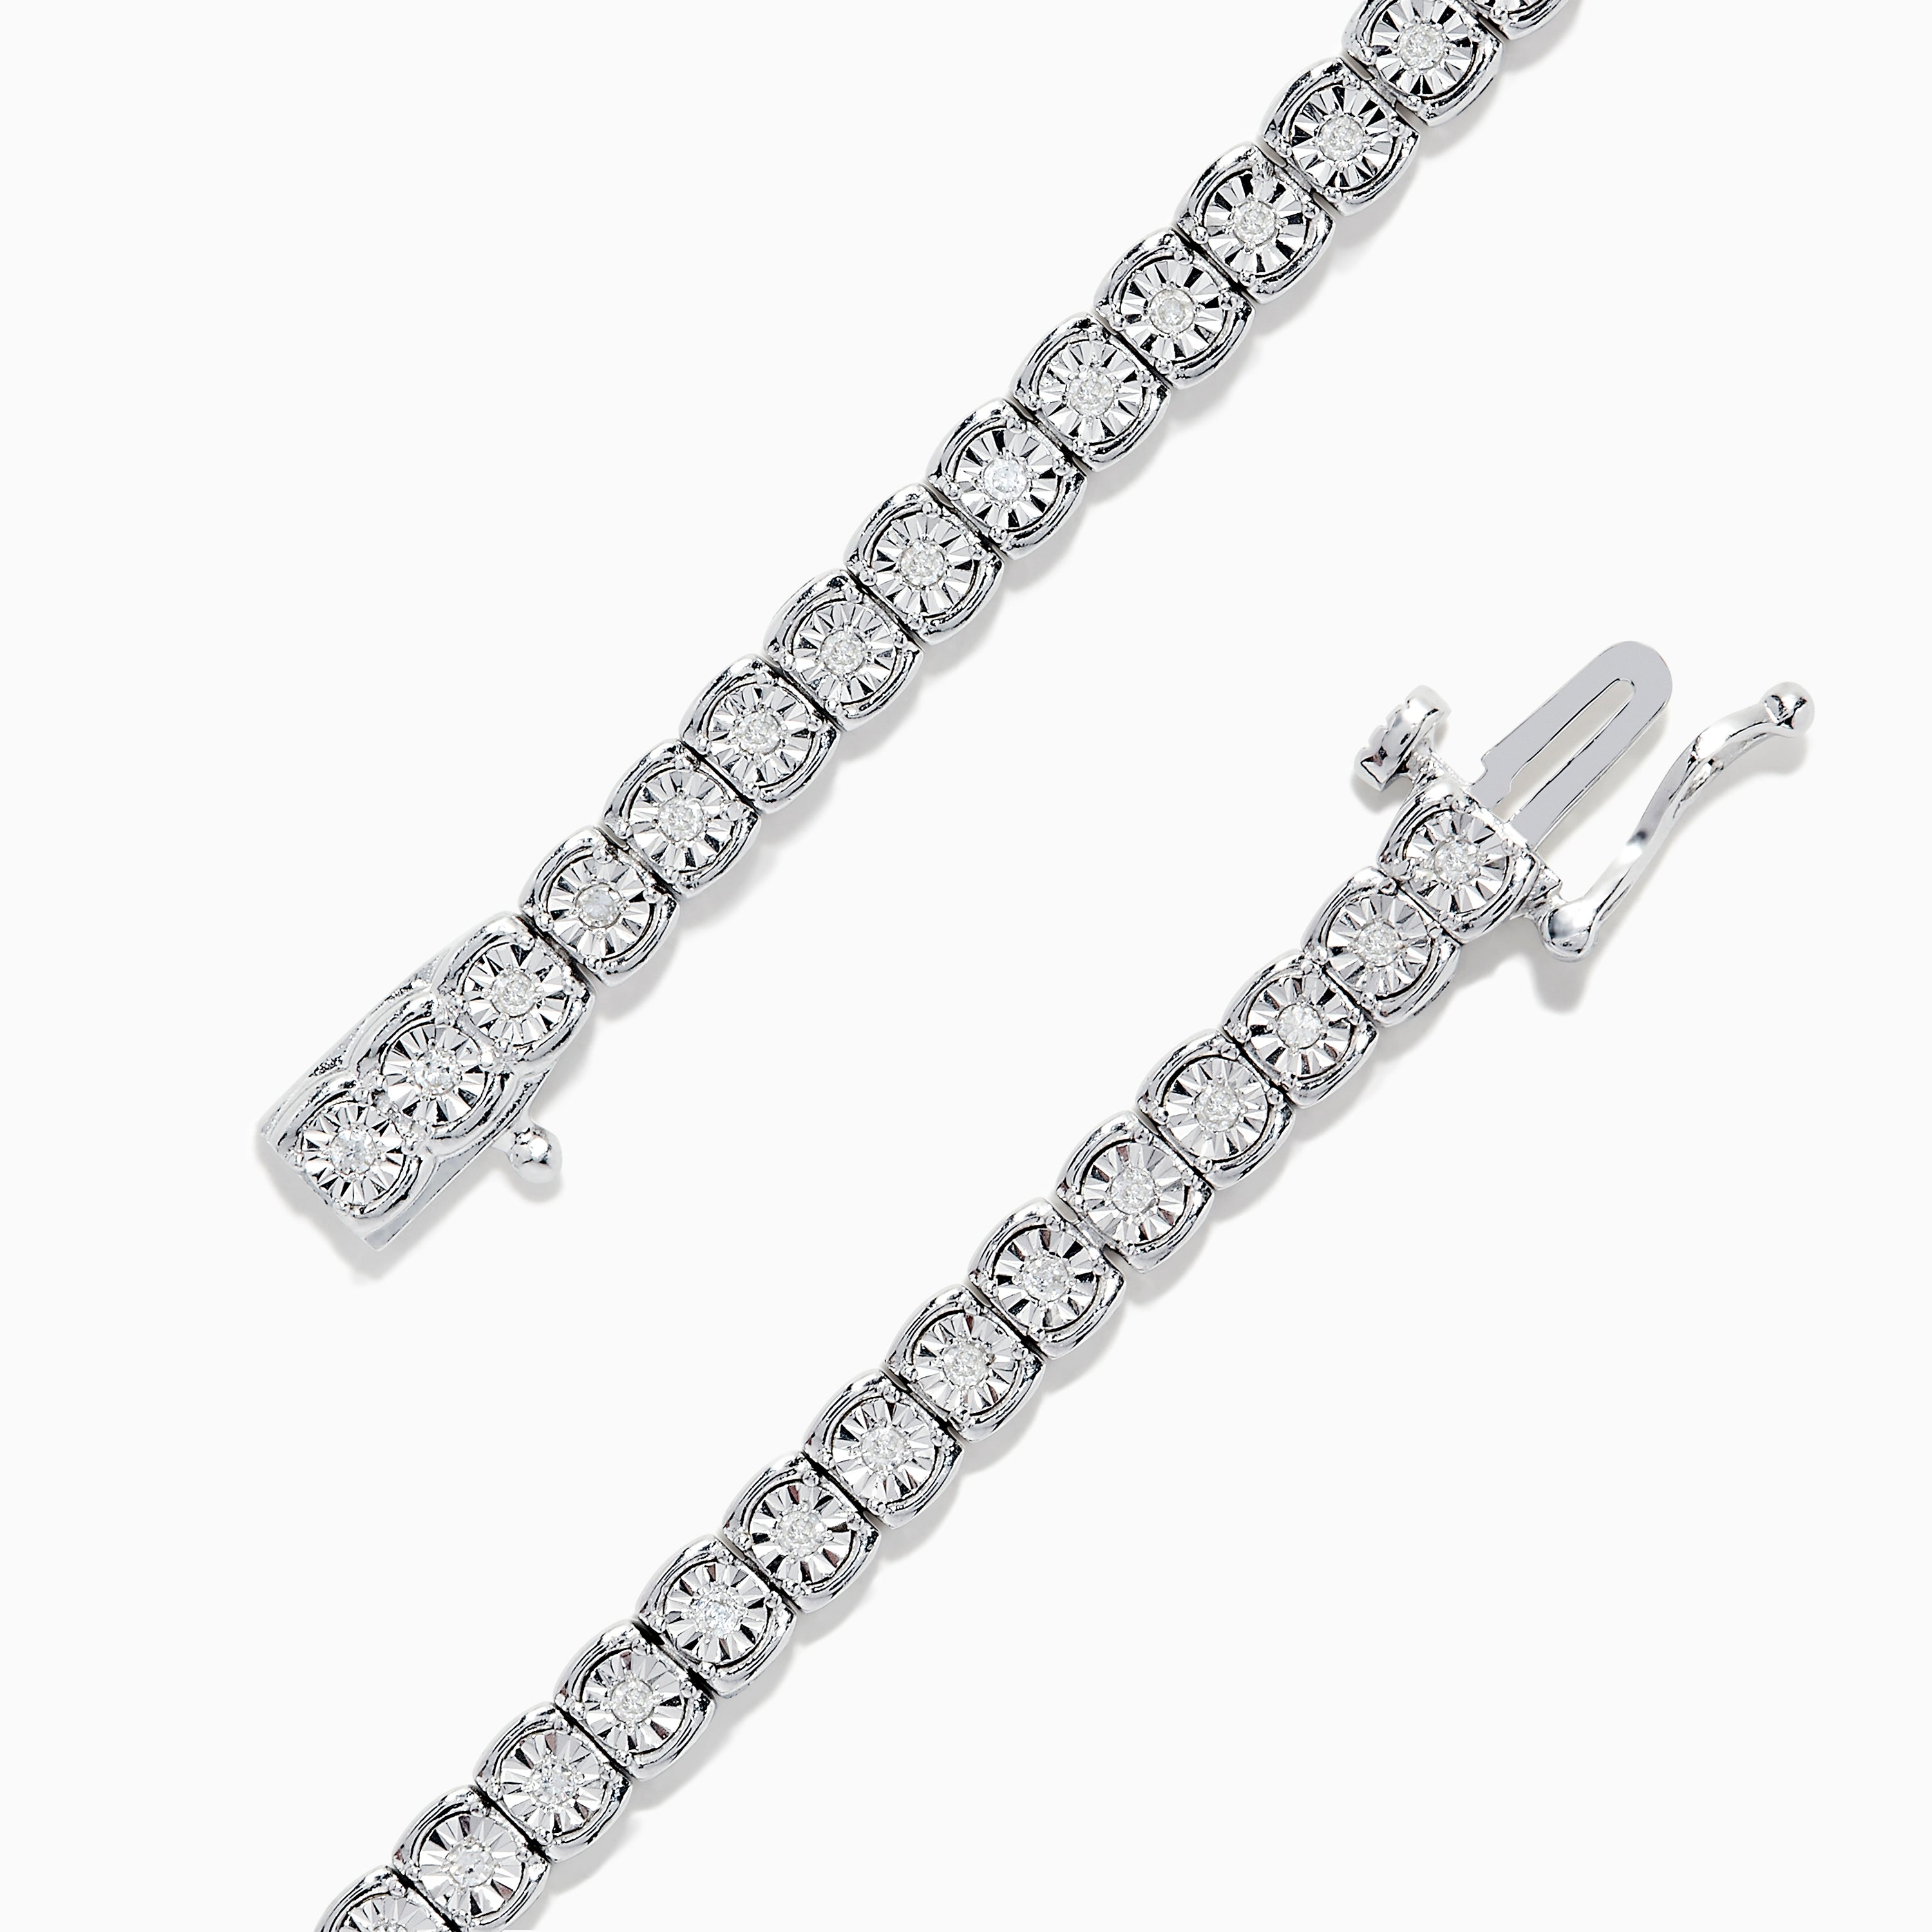 Solid 925 Sterling Silver Bracelet 7mm 8mm Curb Link Chain 6.7inch -  7.48inch